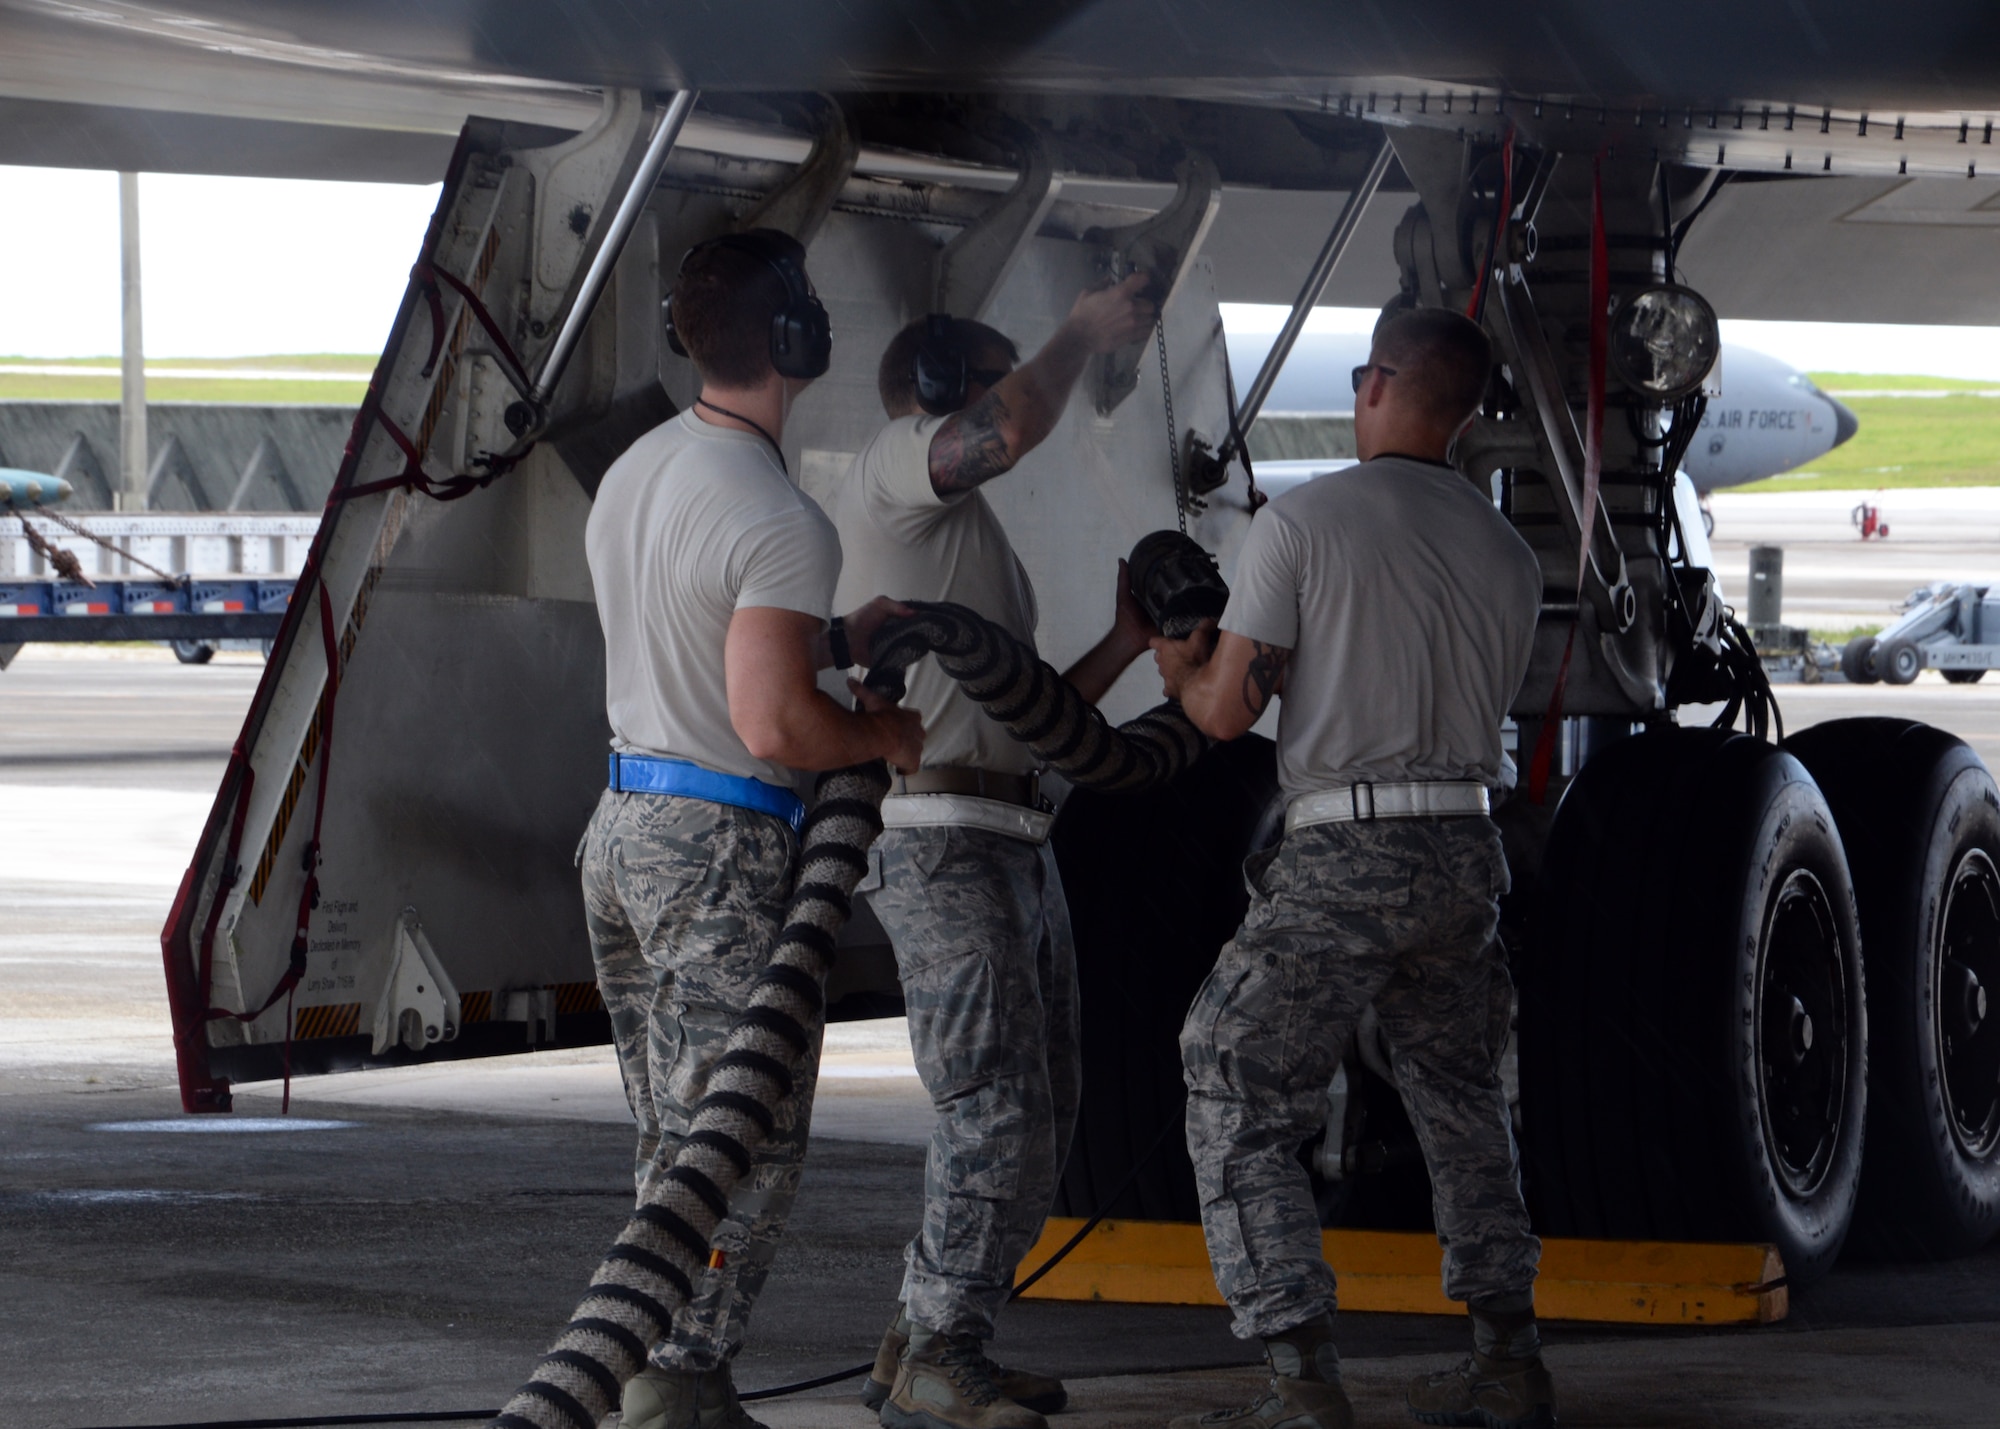 Airmen from the 509th Aircraft Maintenance Squadron work on a B-2 Spirit bomber during a deployment Aug. 22, 2014, at Andersen Air Force Base, Guam. The bombers and approximately 200 support Airmen, assigned to the 509th Bomb Wing at Whiteman Air Force Base, Mo., deployed to Guam to improve combat readiness and ensure regional stability. Bomber deployments help maintain stability in the region while allowing units to become familiar with operating in the theate. (U.S. Air Force photo/Senior Airman Cierra Presentado)